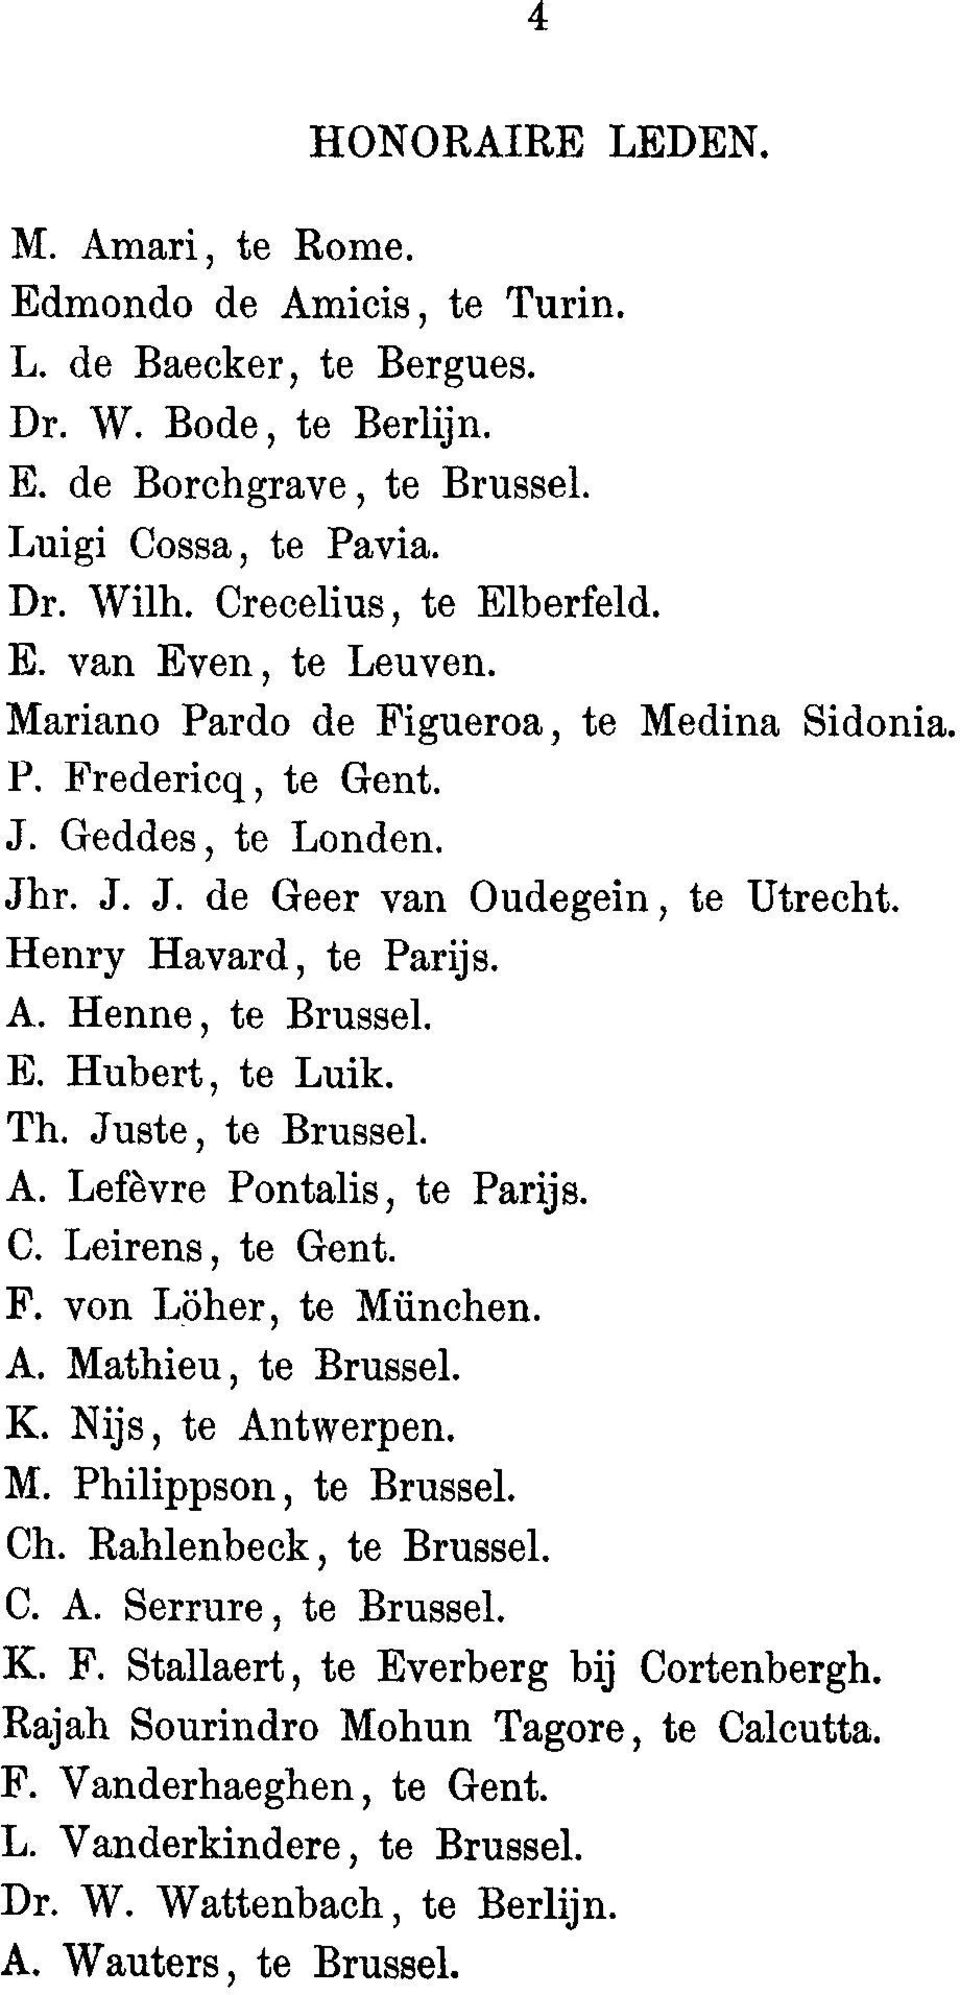 Henry Havard, to Parij s. A. Henne, to Brussel. E. Hubert, to Luik. Th. Juste, to Brussel. A. Lefevre Pontalis, to Parijs. C. Leirens, to Gent. F. von Loher, to Munchen. A. Mathieu, to Brussel. K.